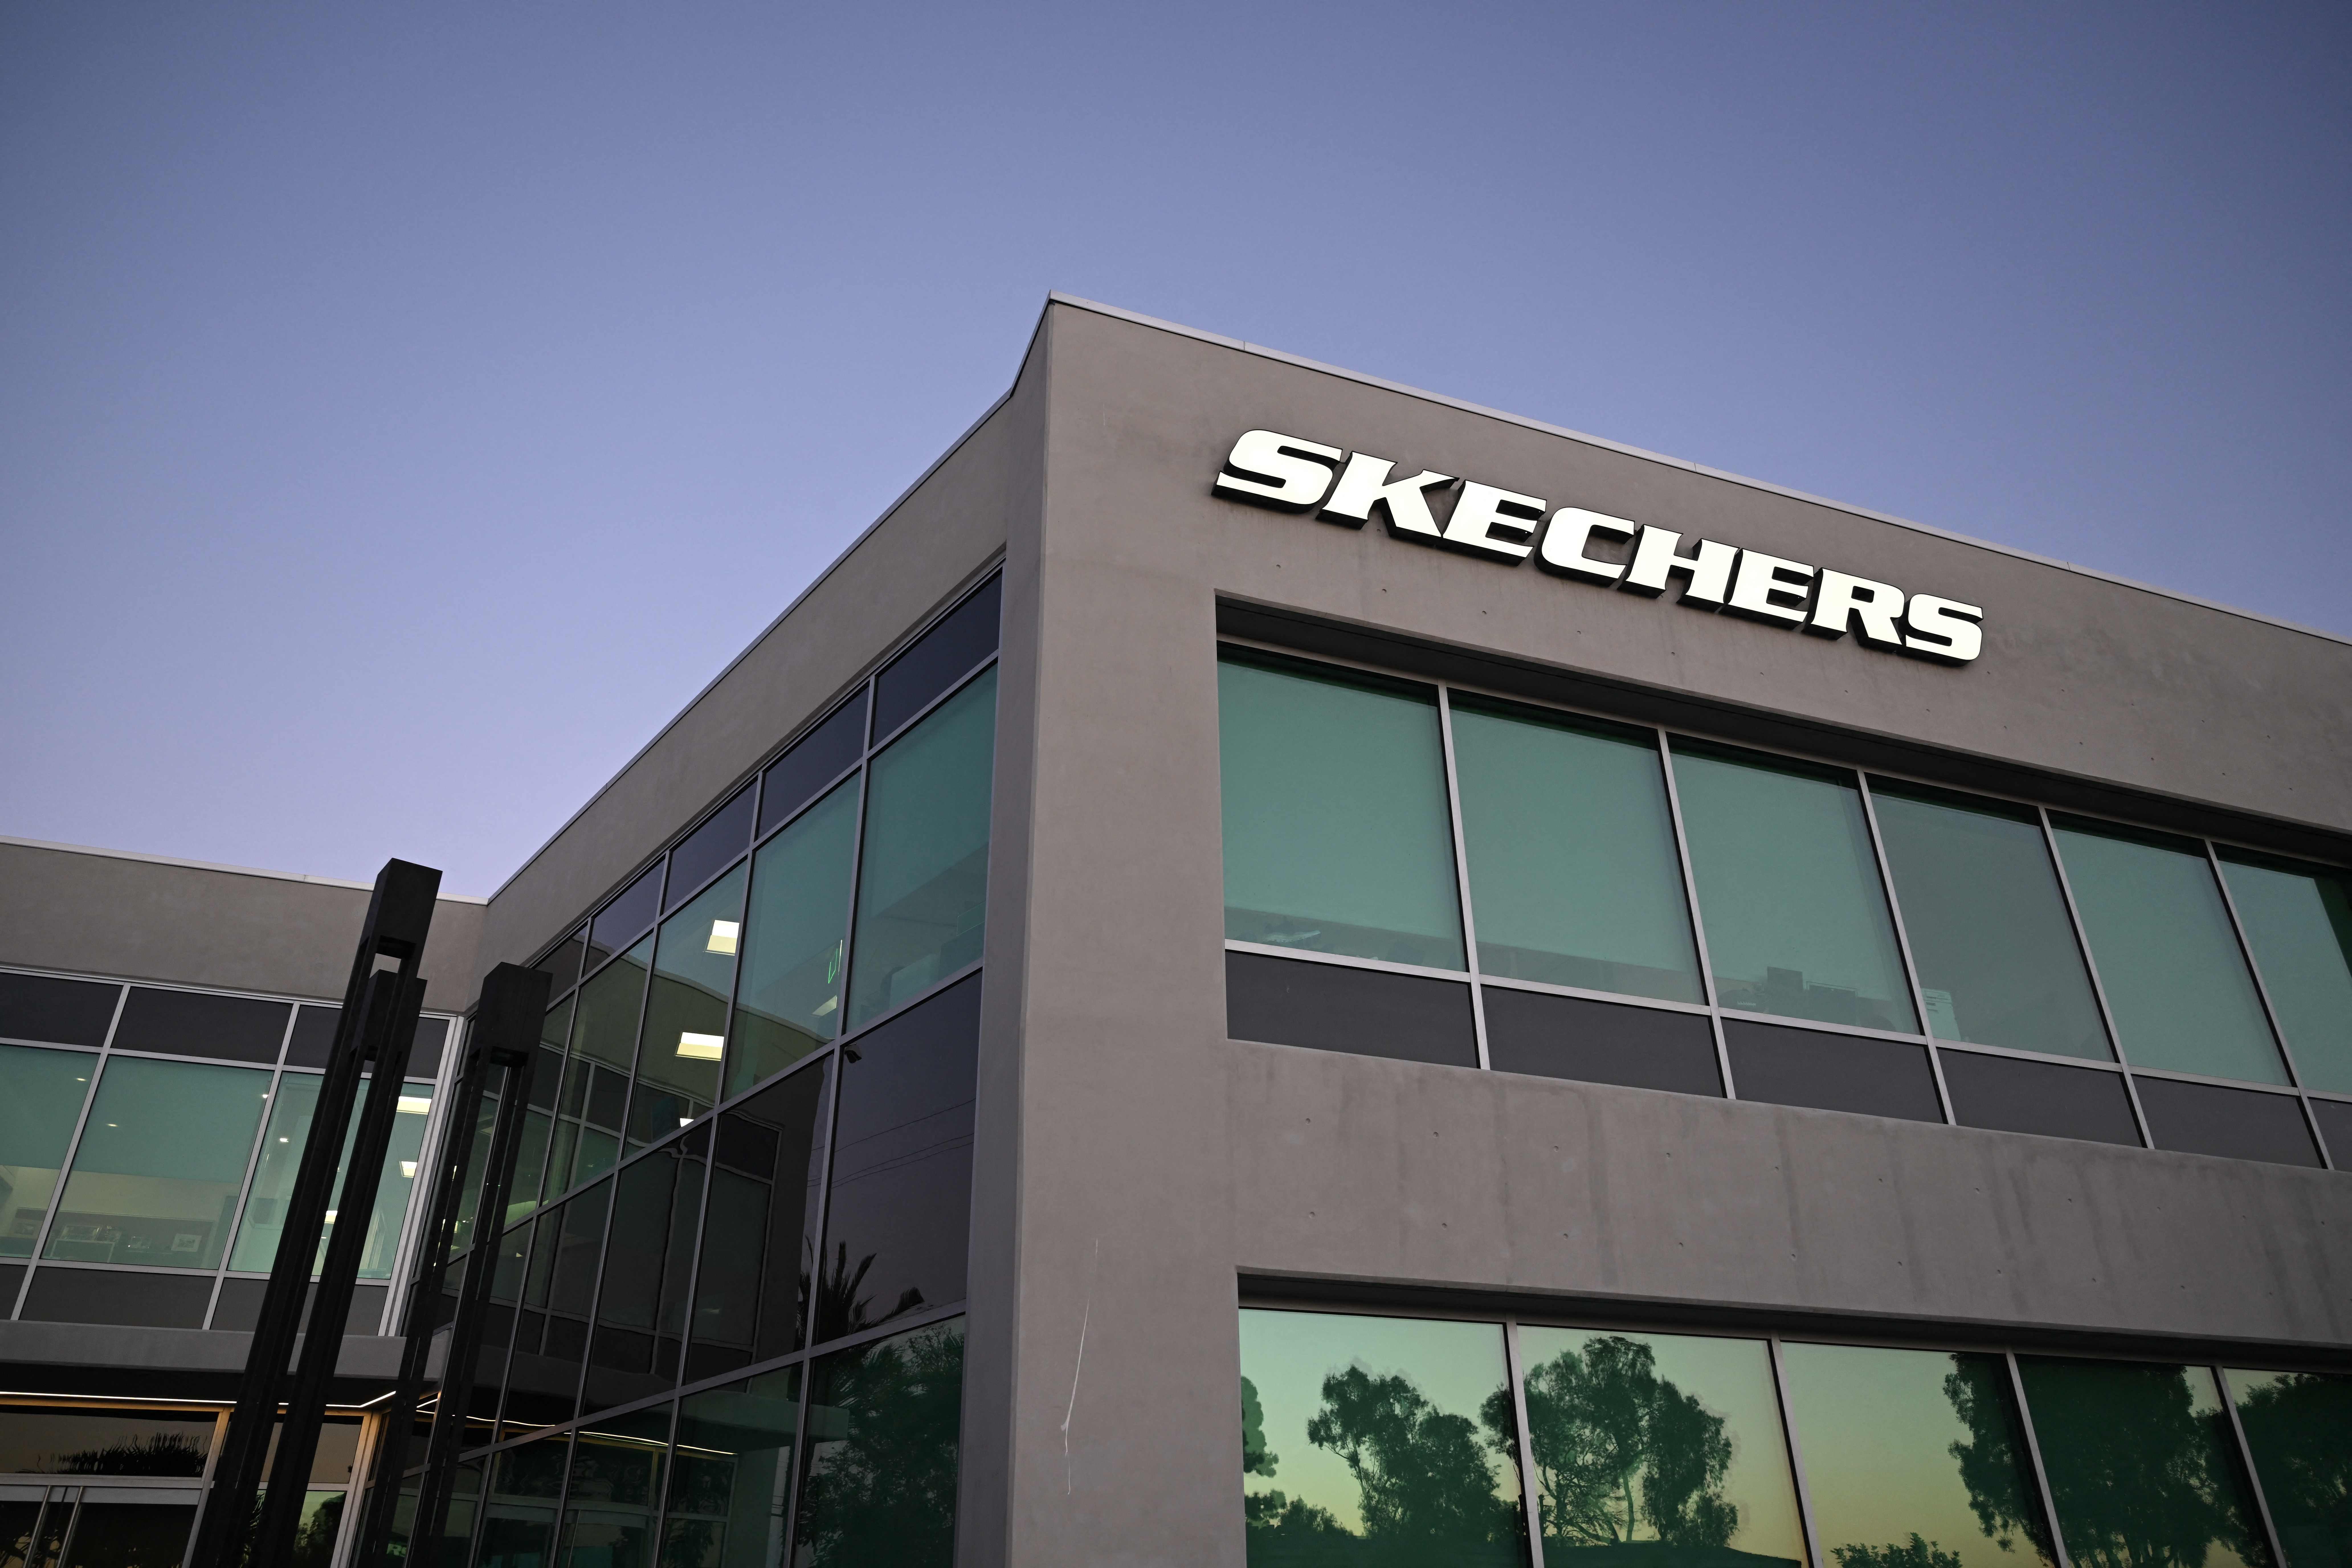 West kicked out of Skechers' headquarters in California - The Globe and Mail